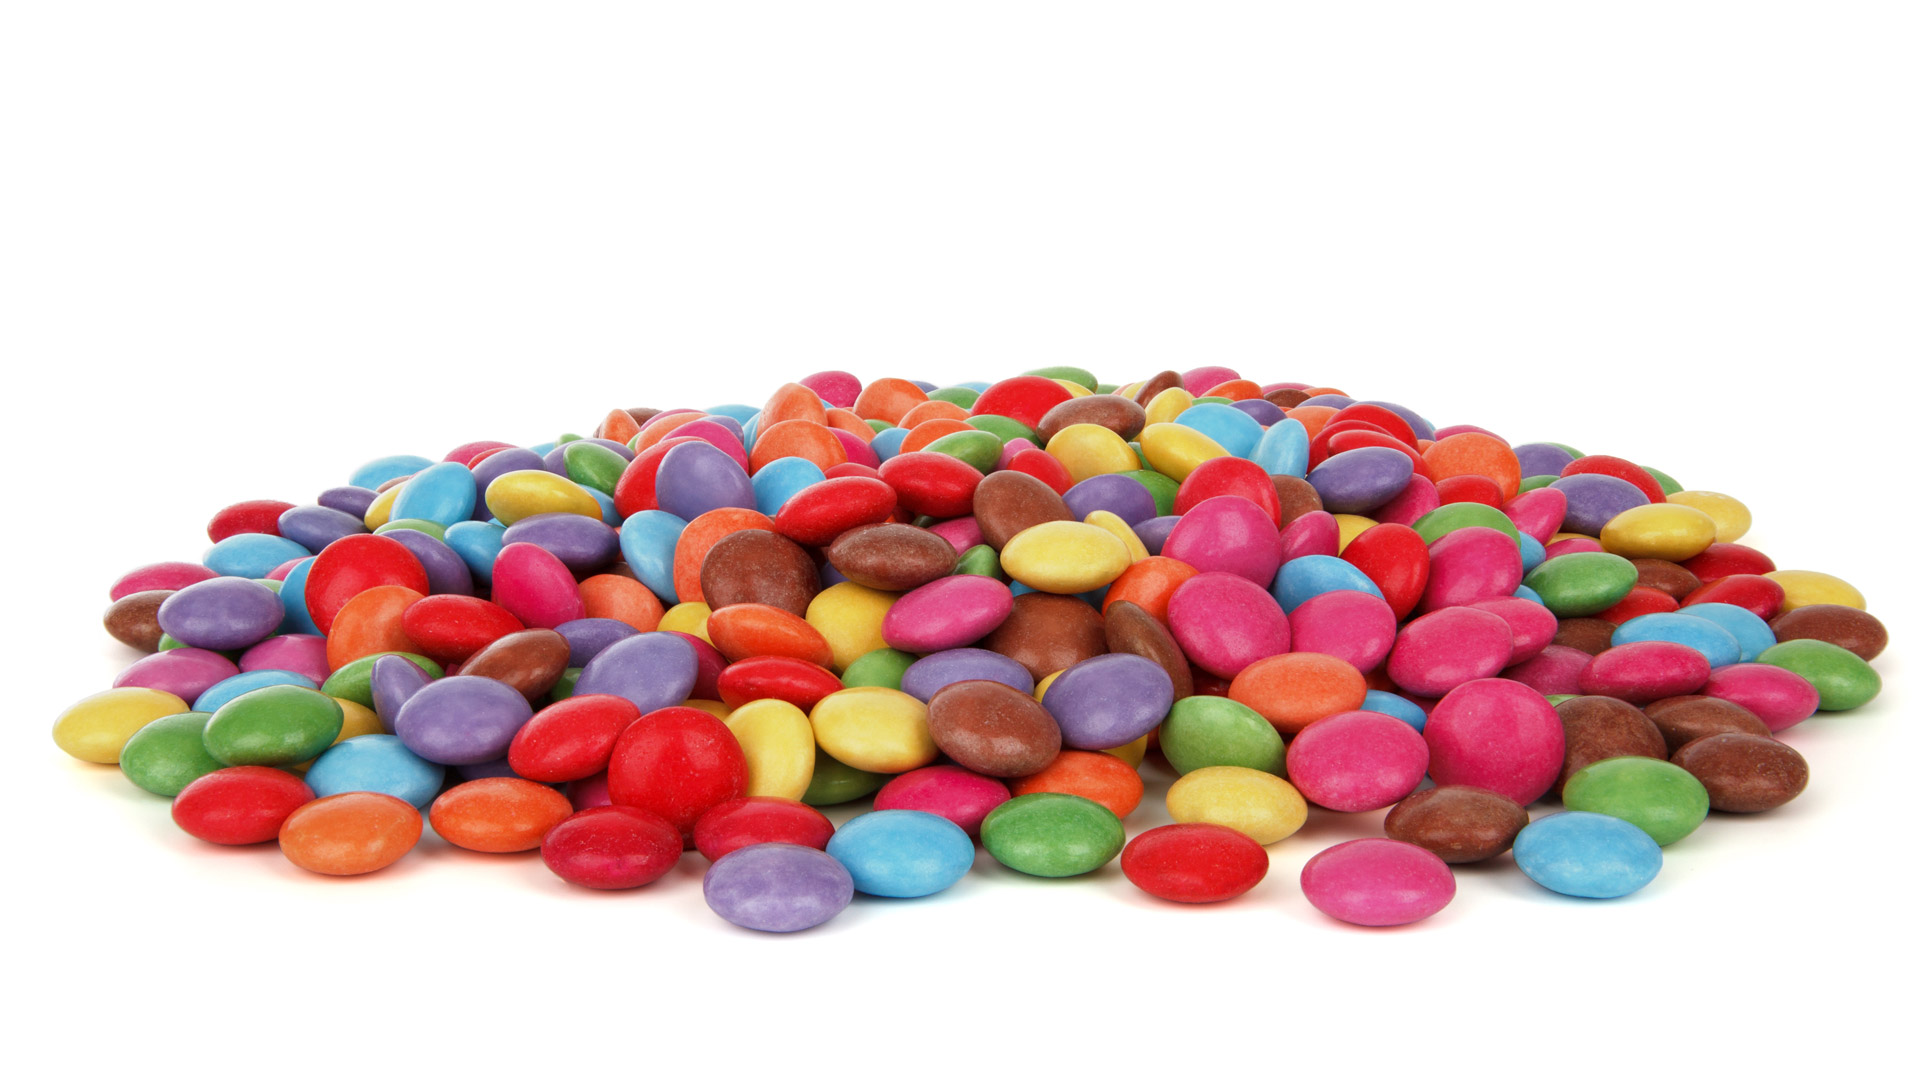 a pile of colorful sugar coated chocolate buttons isolated on white background